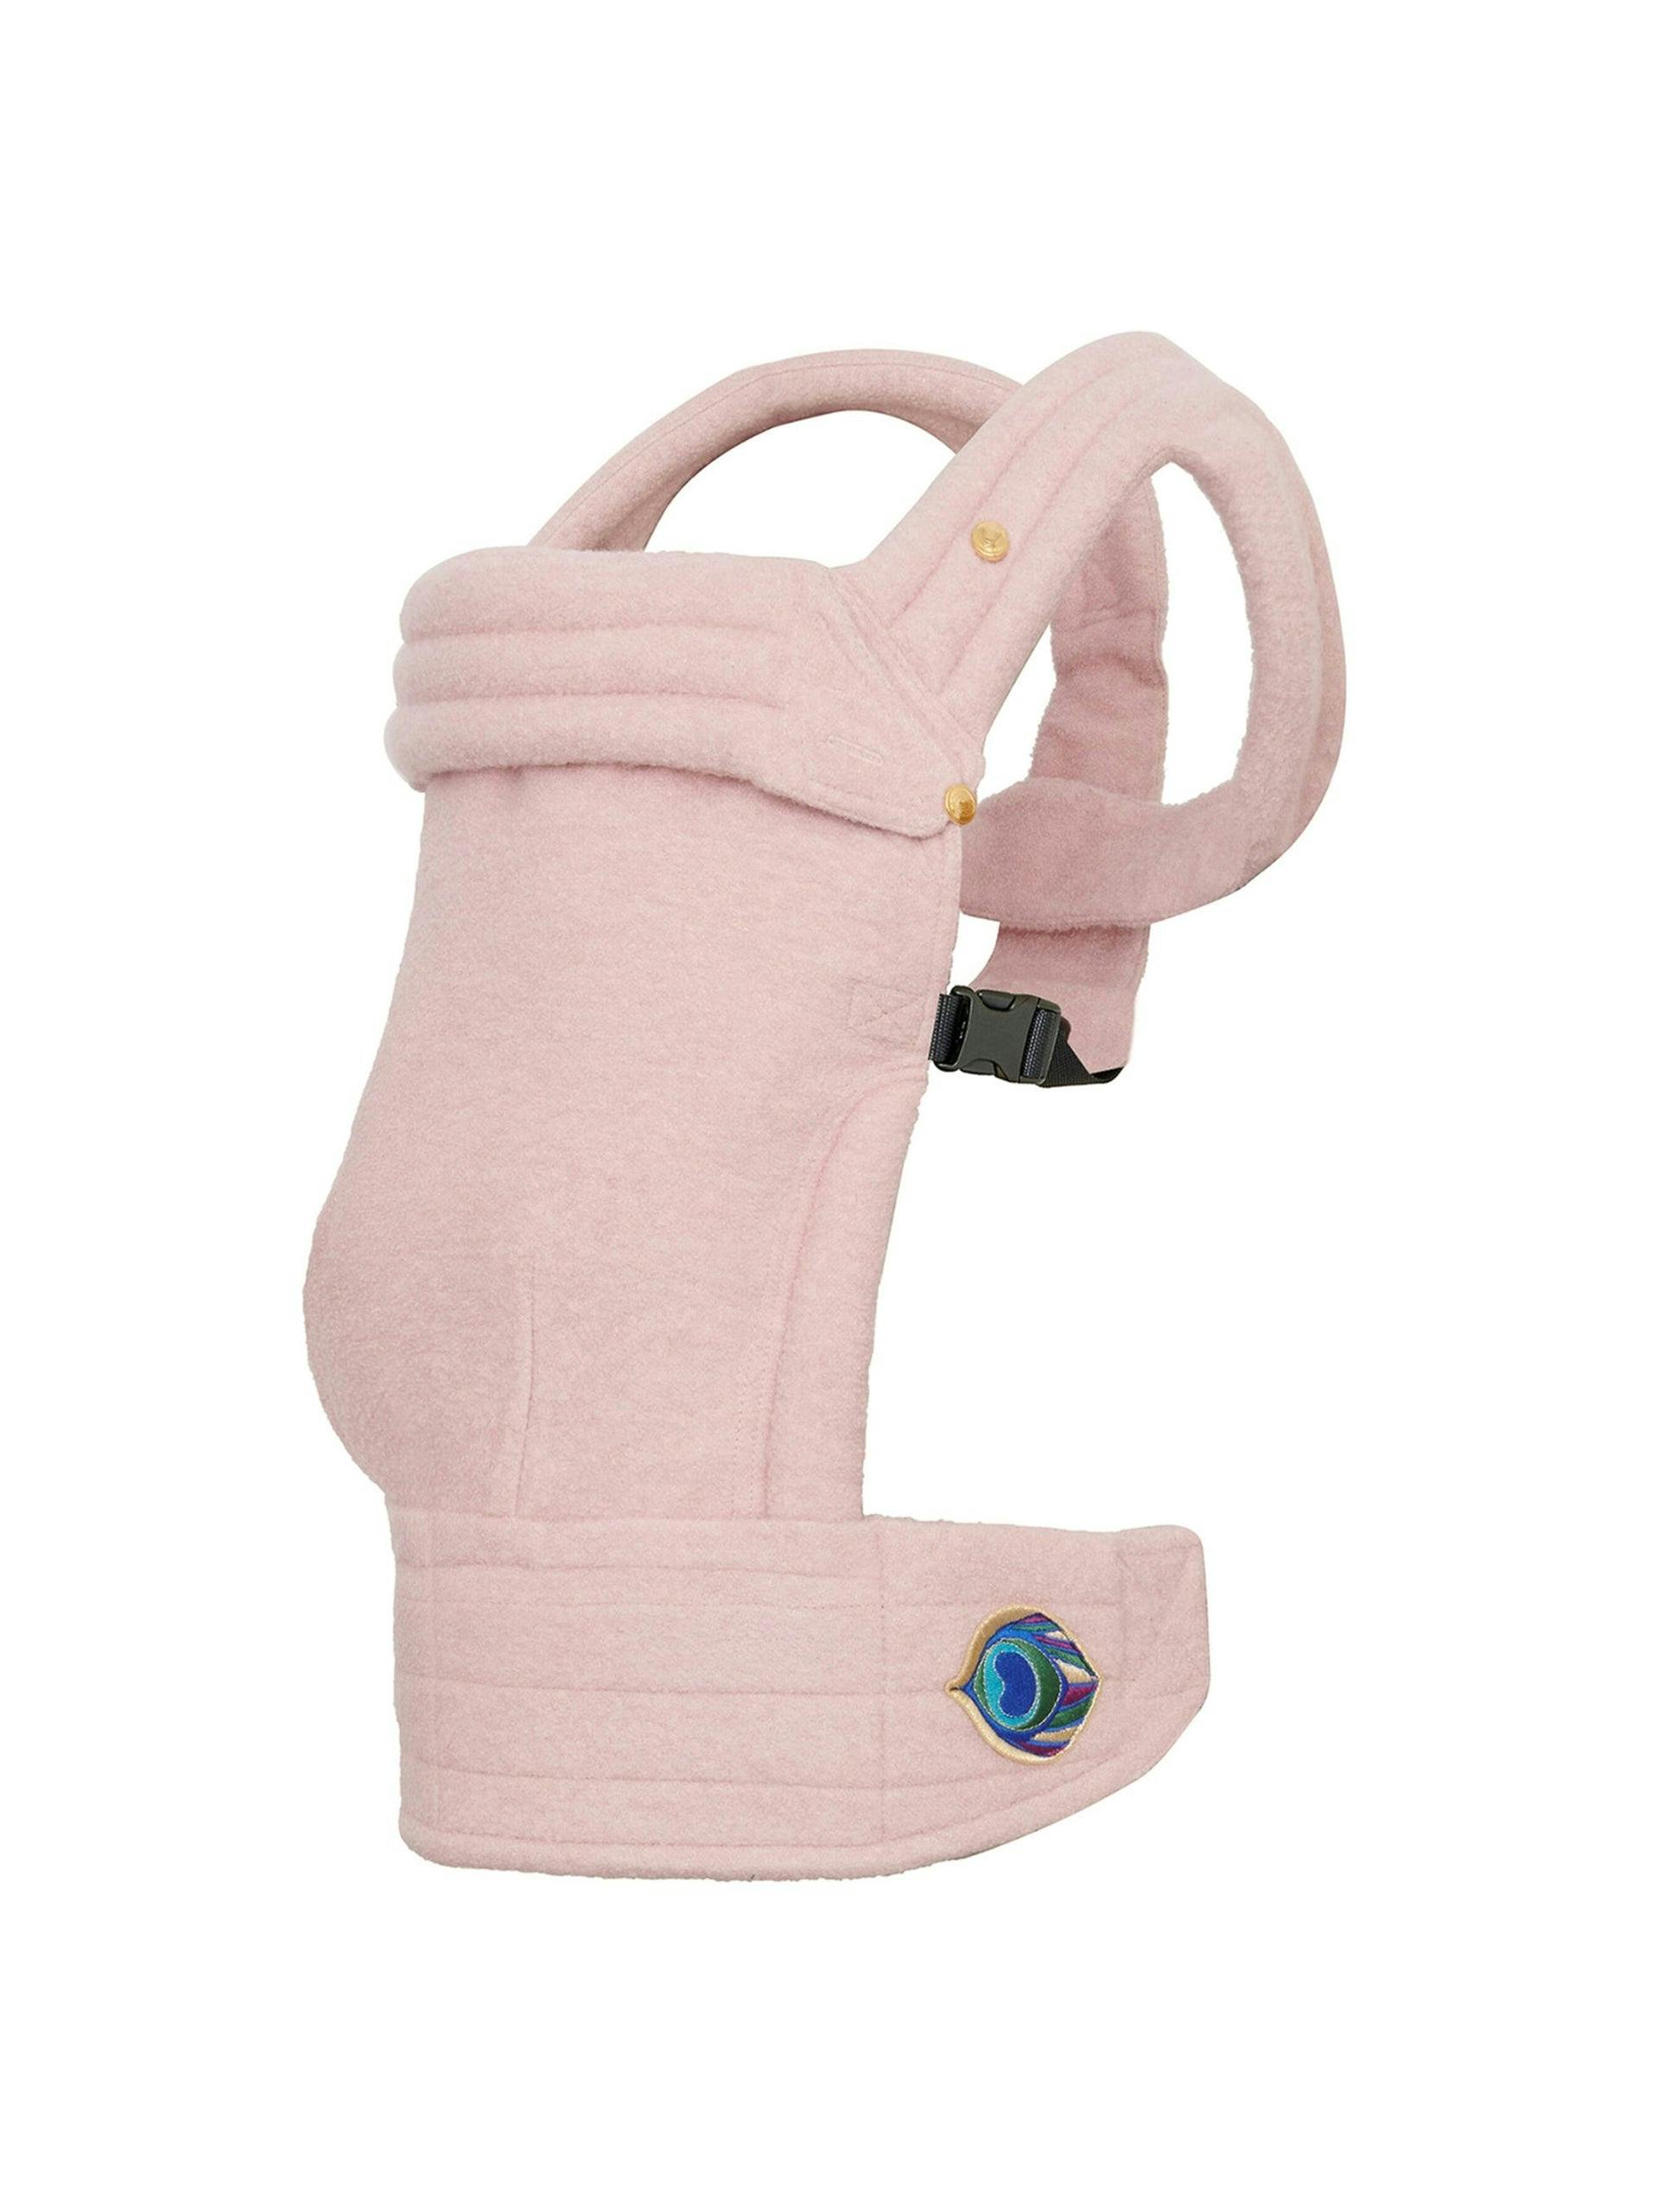 Adjustable cashmere and cotton baby carrier